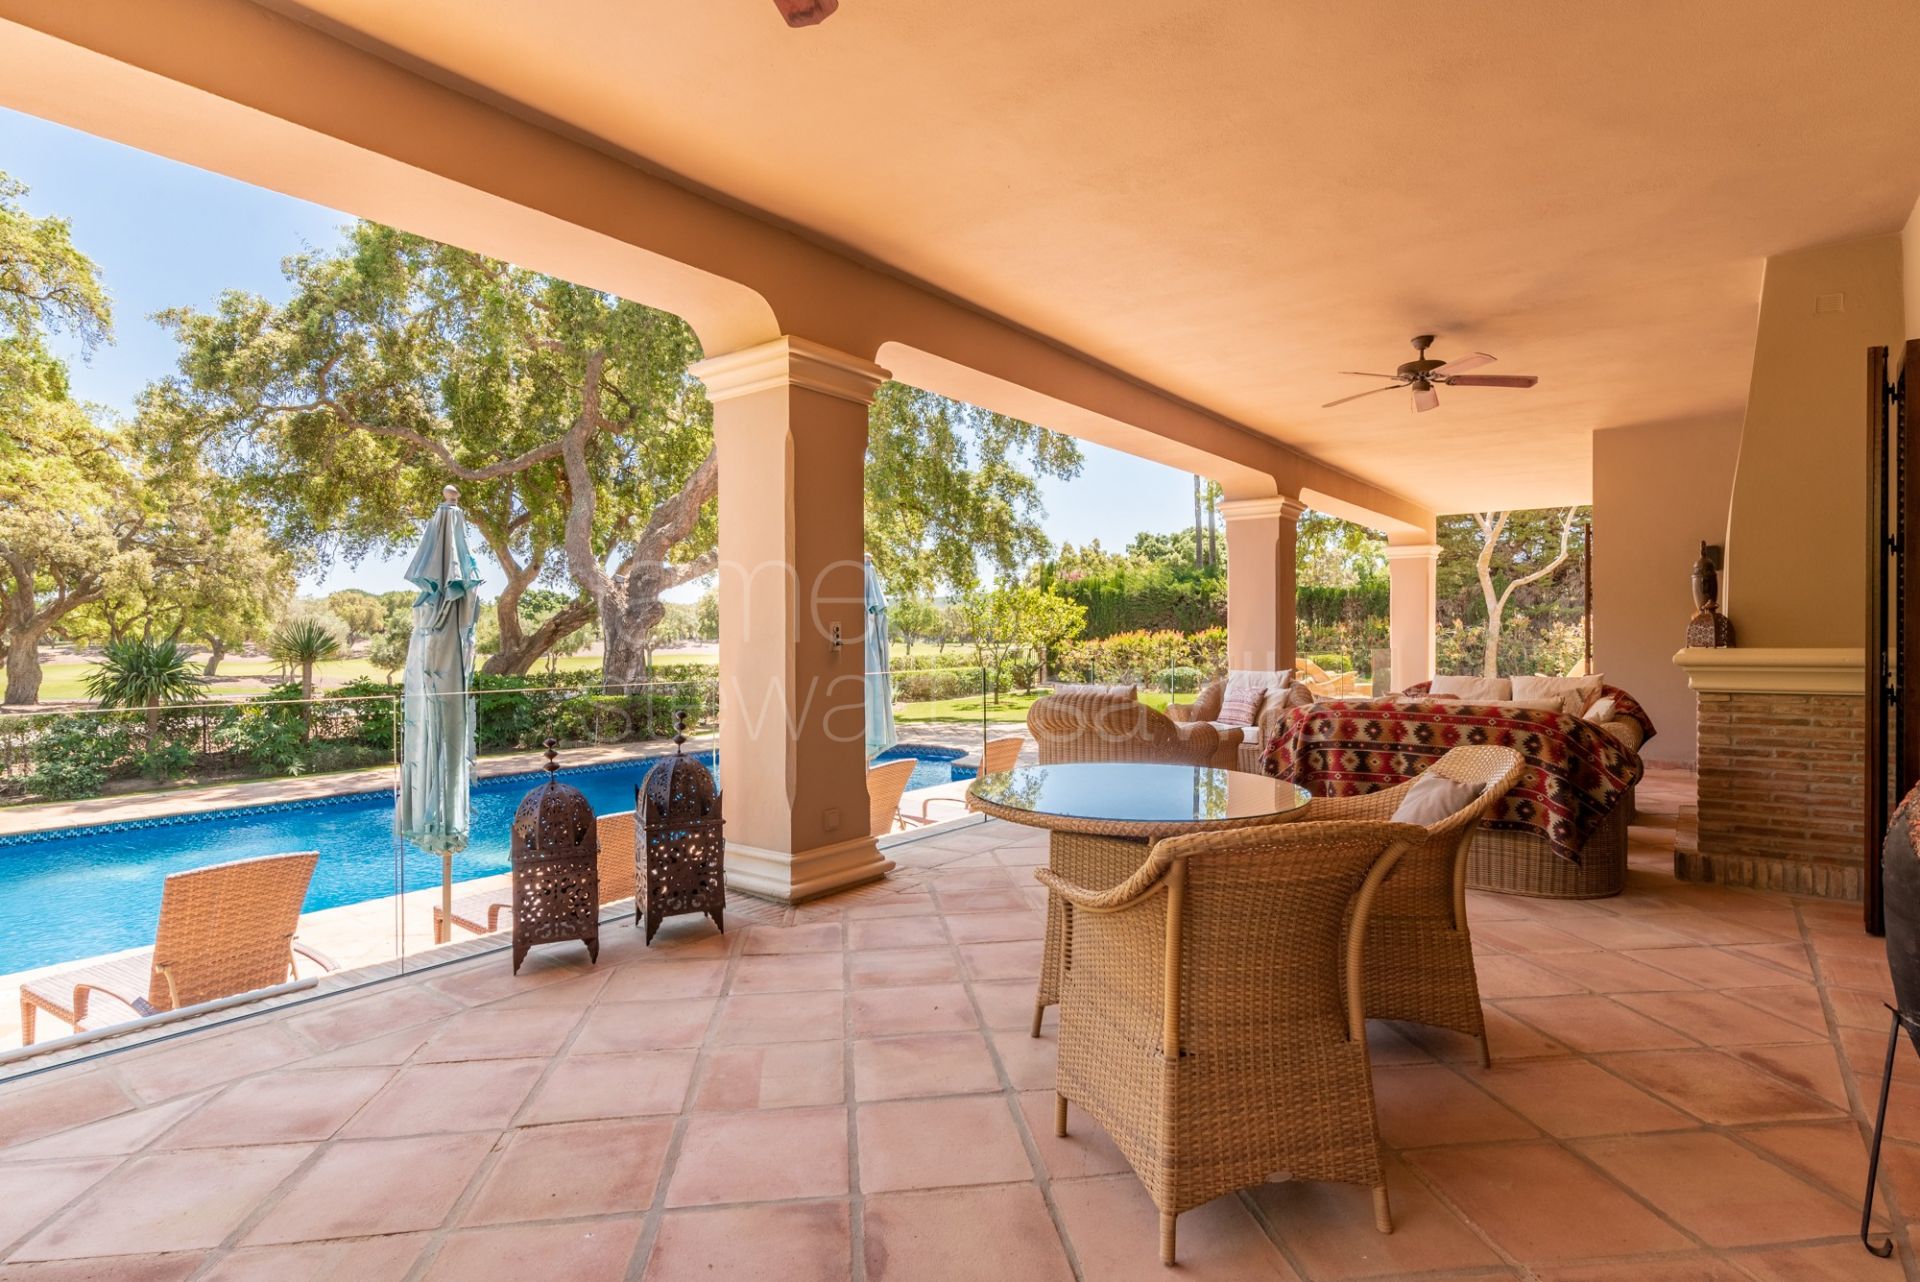 Excellent Andaluz style villa frontline to San Roque Golf old Course